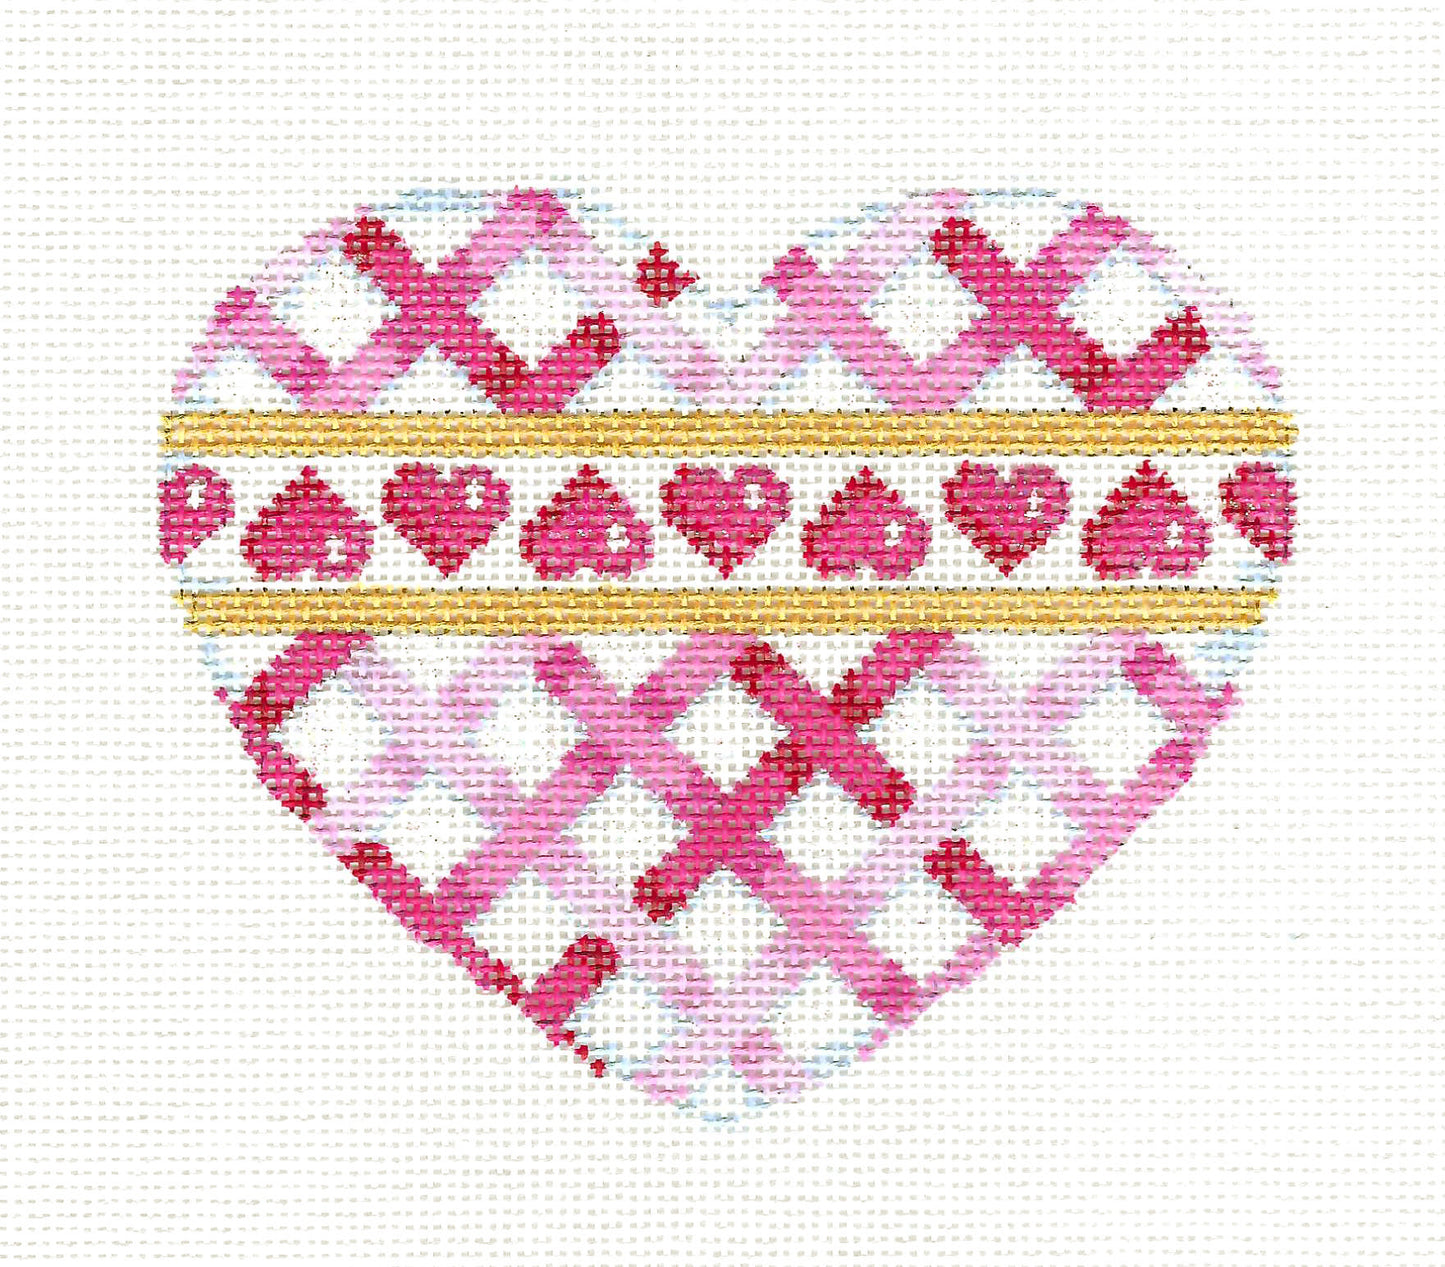 Heart ~ Pink, White & Gold Woven Ribbons Heart handpainted Needlepoint Ornament by Assoc. Talents